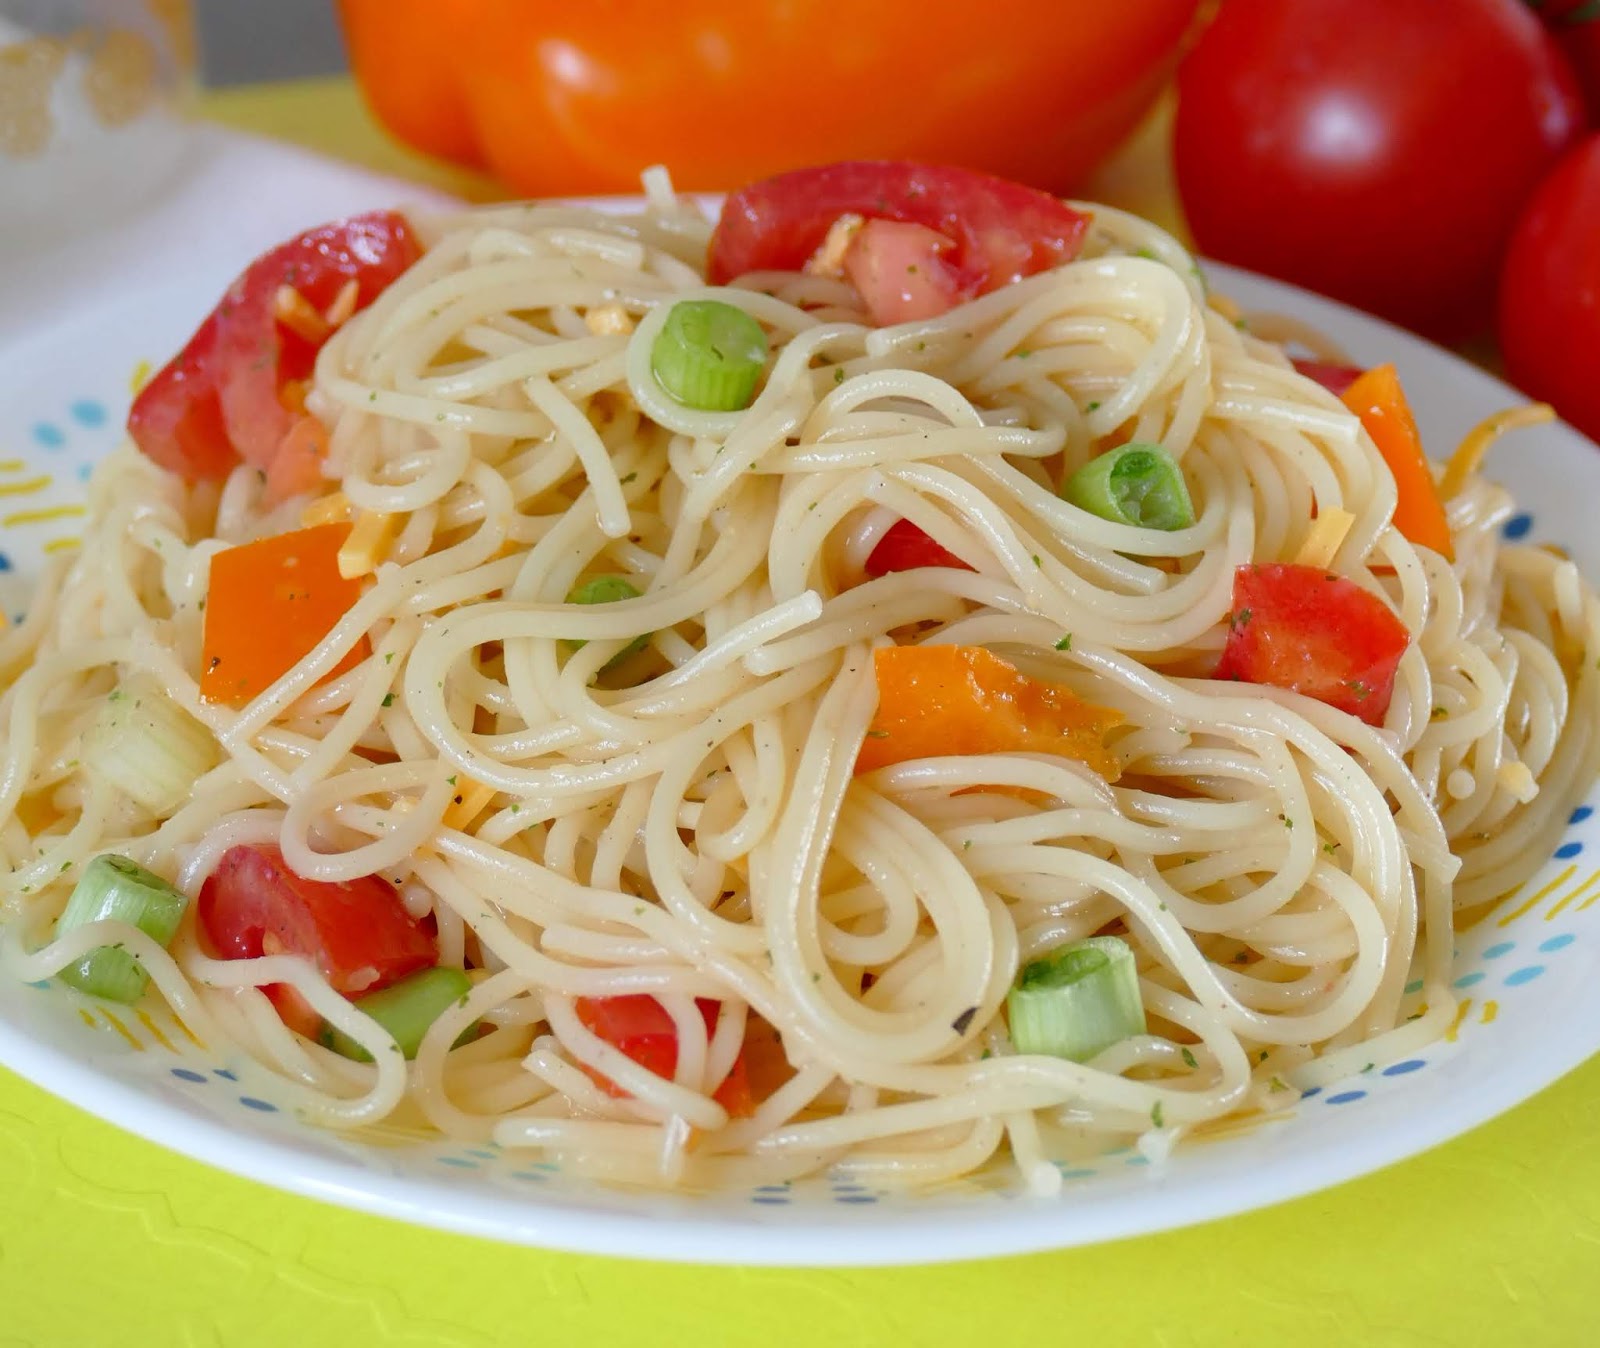 This simple pasta salad is great for any spring or summer BBQ, potluck, meal or picnic! The ranch adds delicious flavor to the pasta, tomatoes, green onions and bell pepper. Plus there's no mayo which makes it versatile and easy to customize!